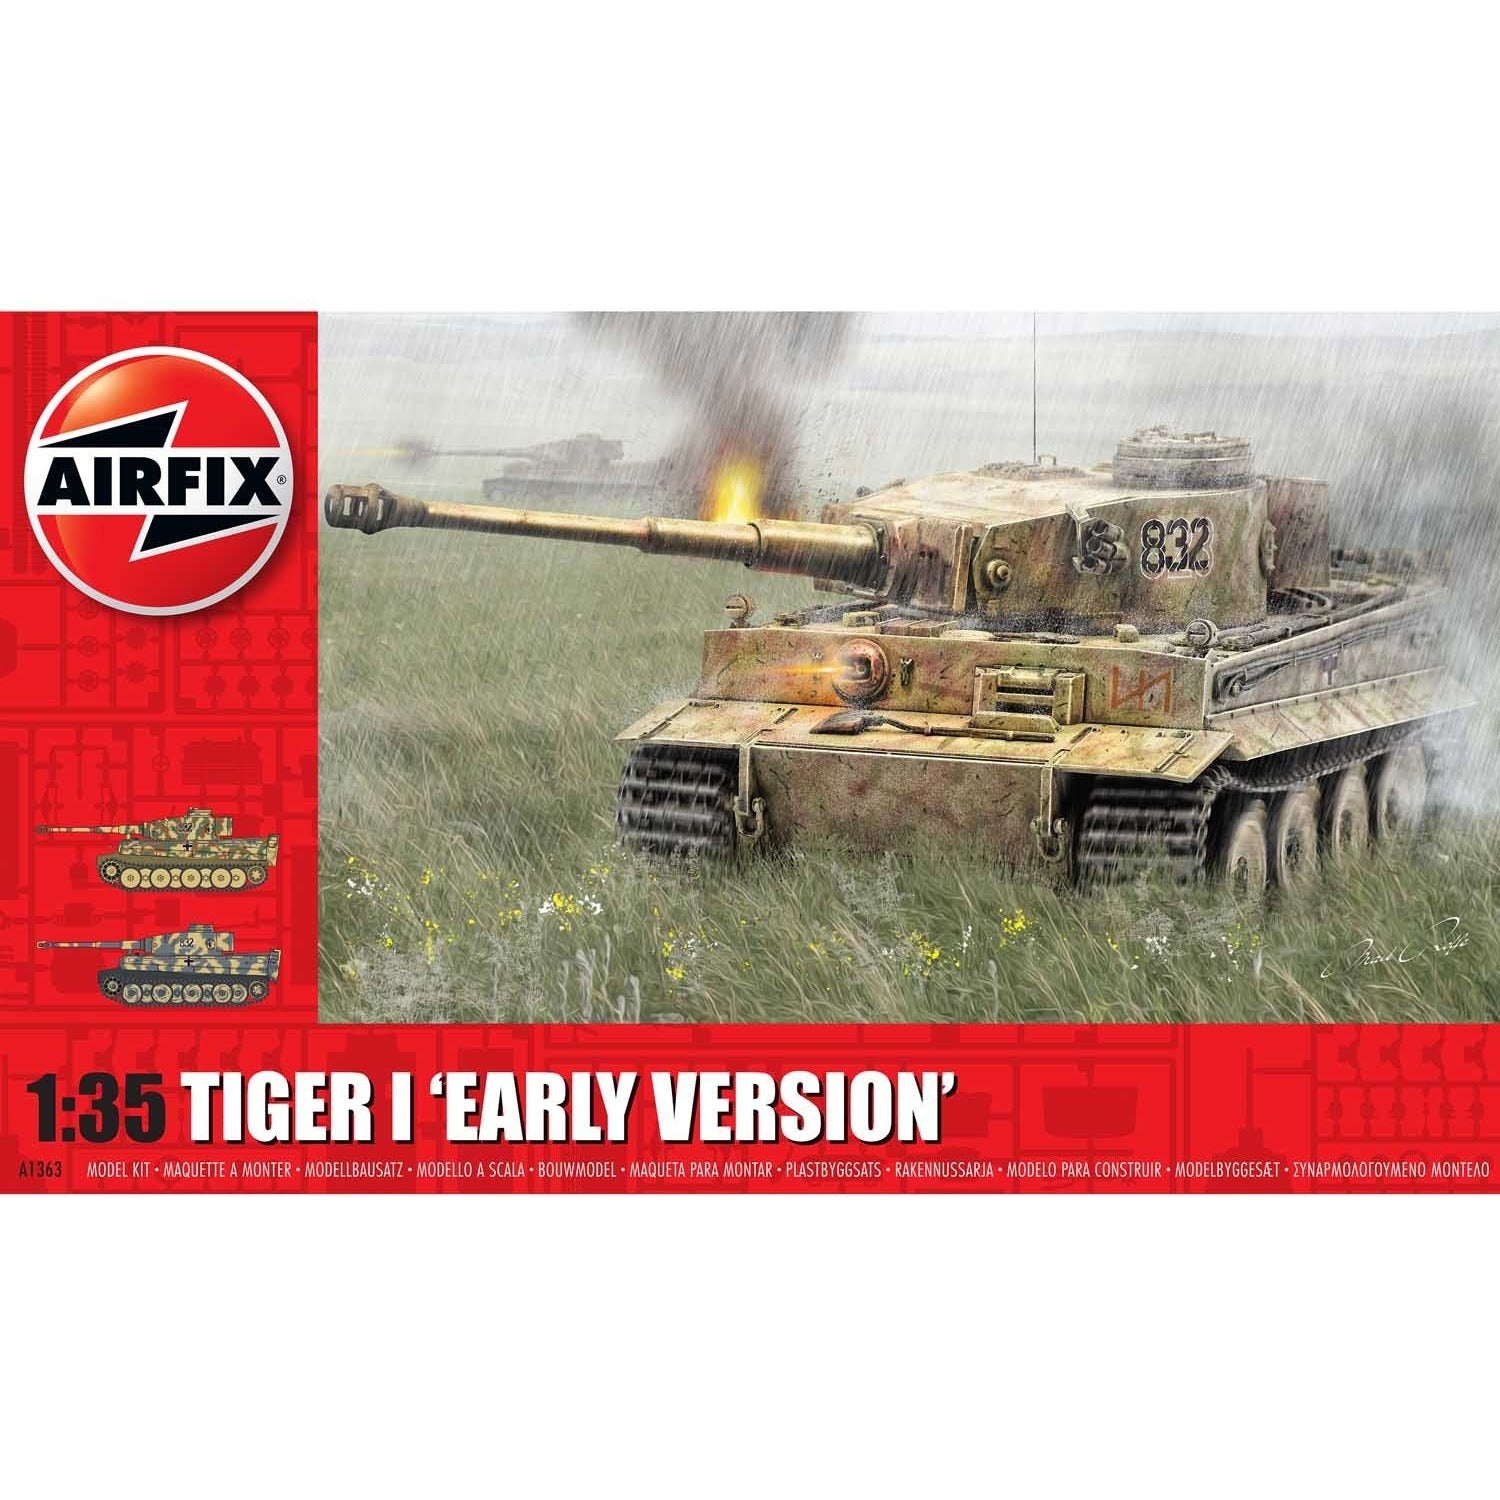 Tiger 1 early version 1/35 by Airfix